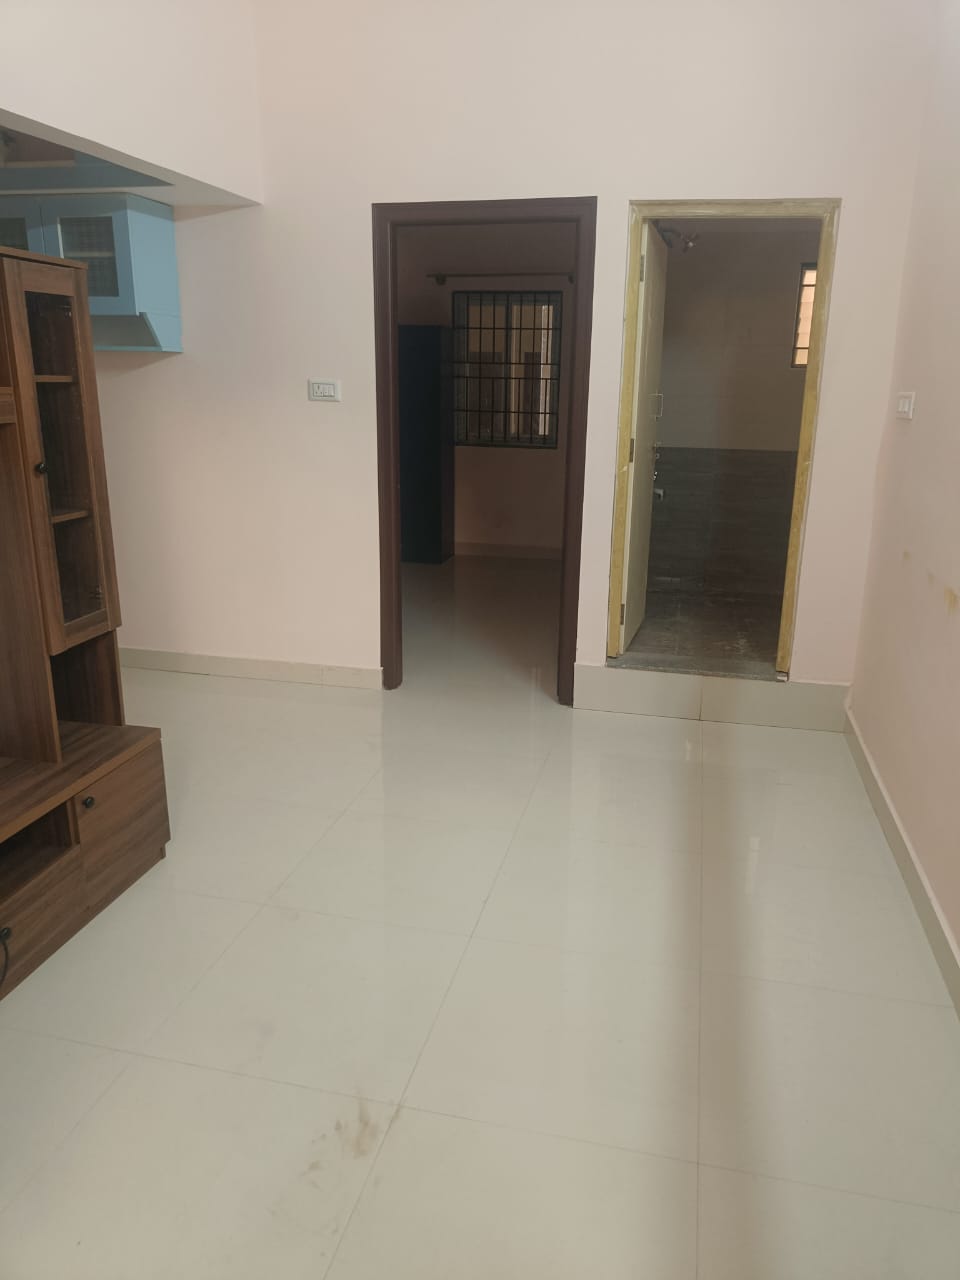 1 BHK Residential Apartment for Lease Only at JAML2 - 5021-17lakh in Ajjanahalli